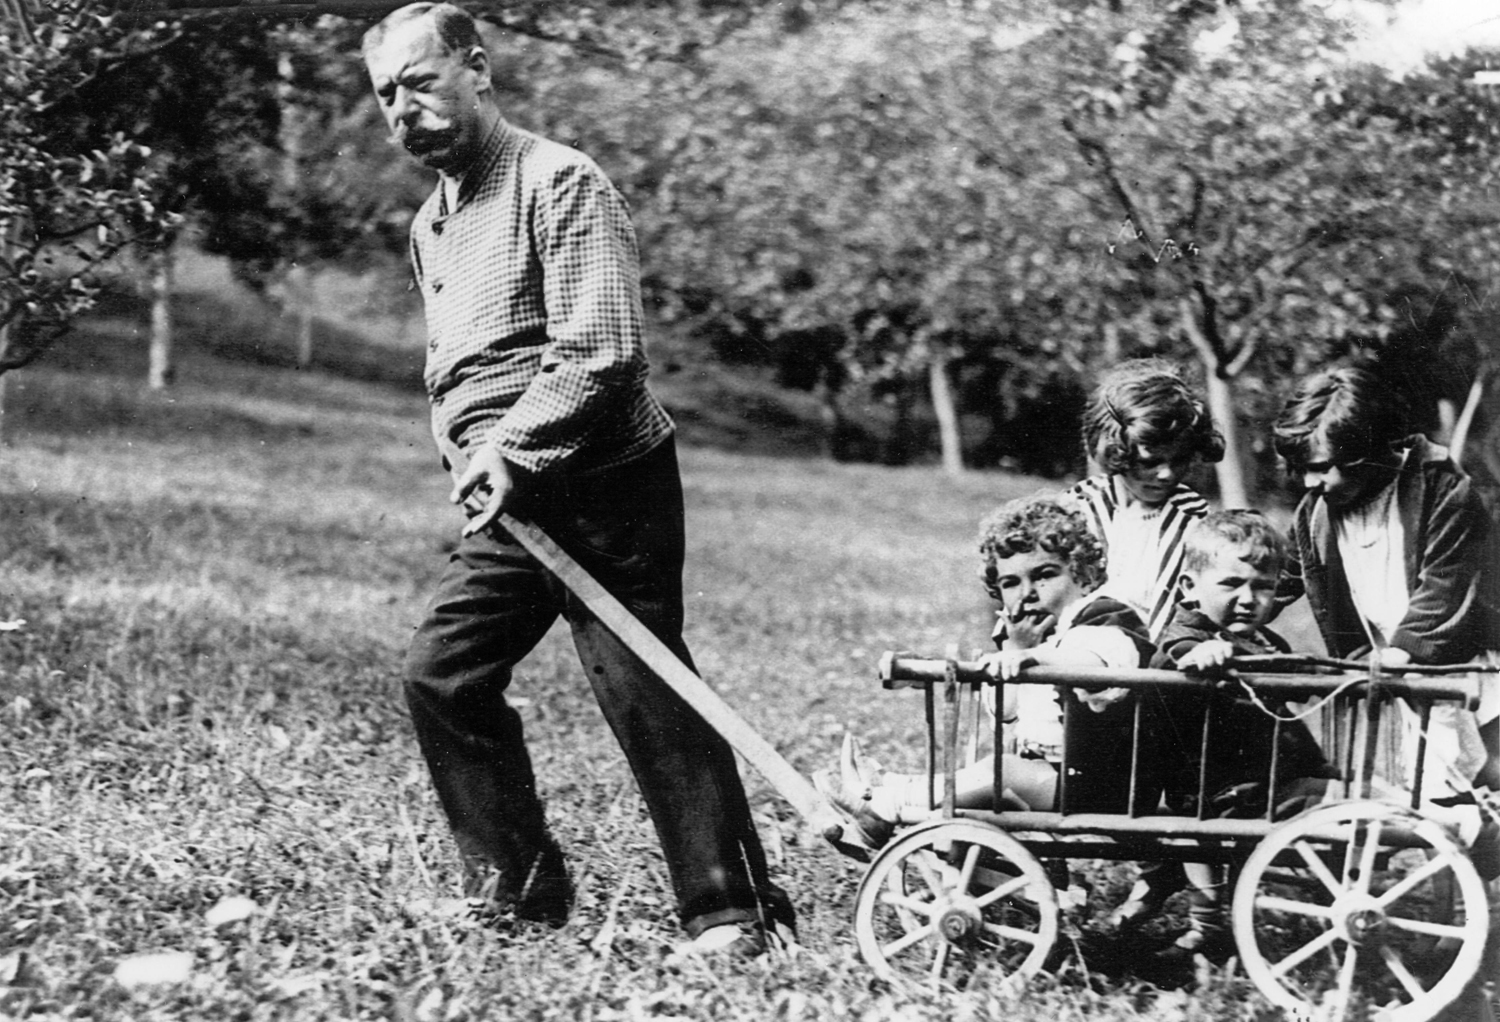 Robert Braun, one of the children saved by the Krauses, sits between his sisters Martha and Johanna, while being pulled in a wagon by their father, Max.